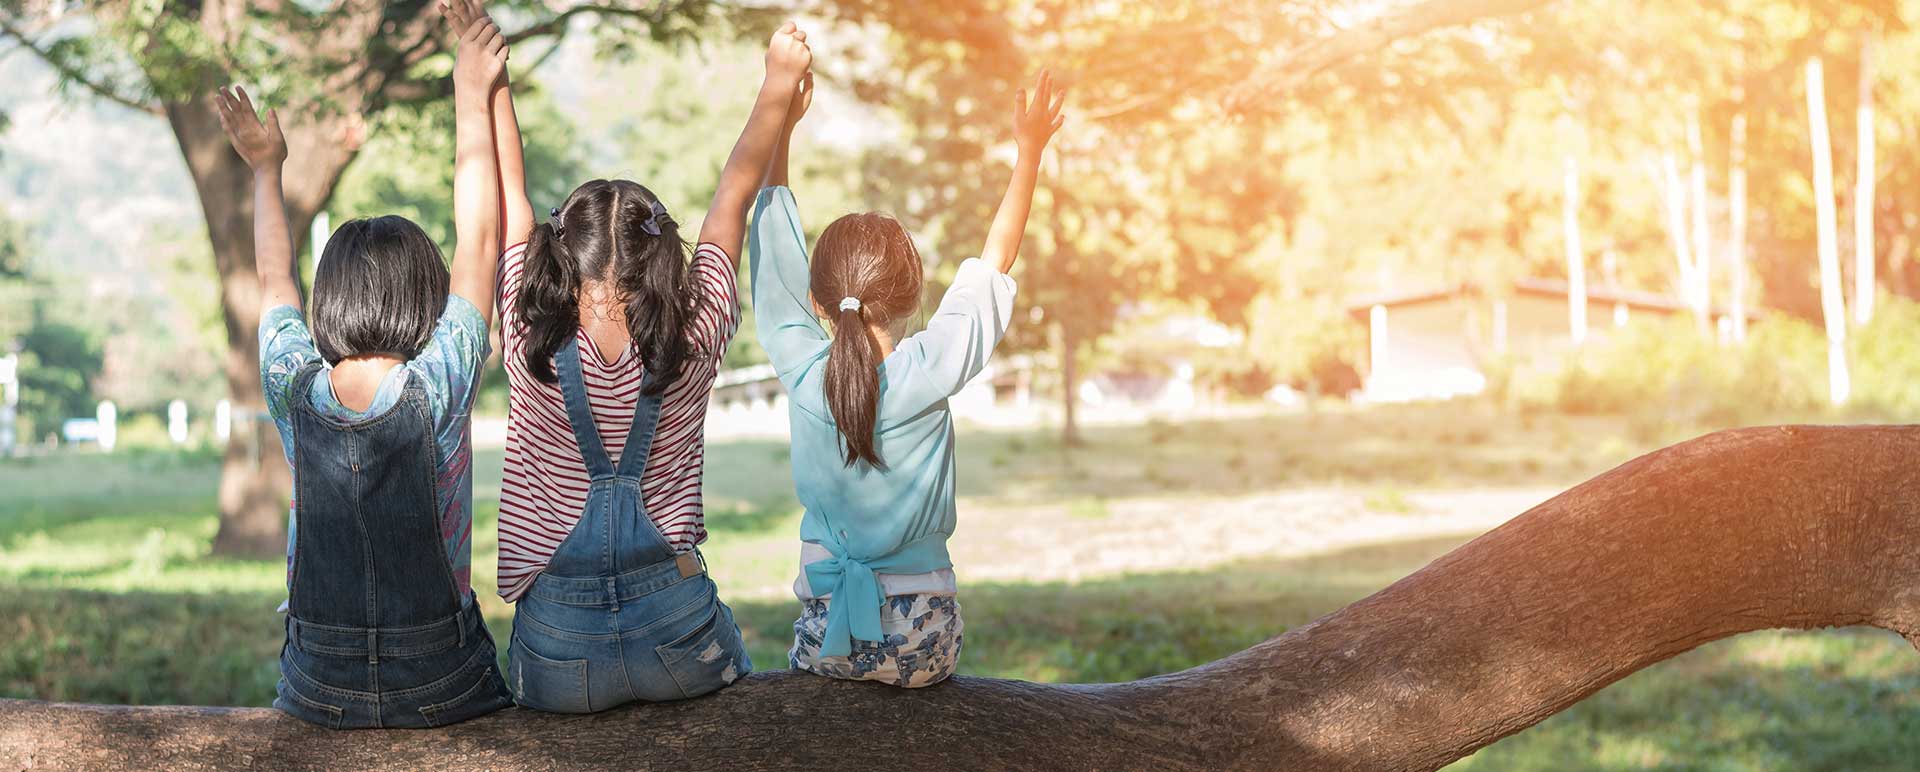 three girls sitting on tree branch with hands raised up 